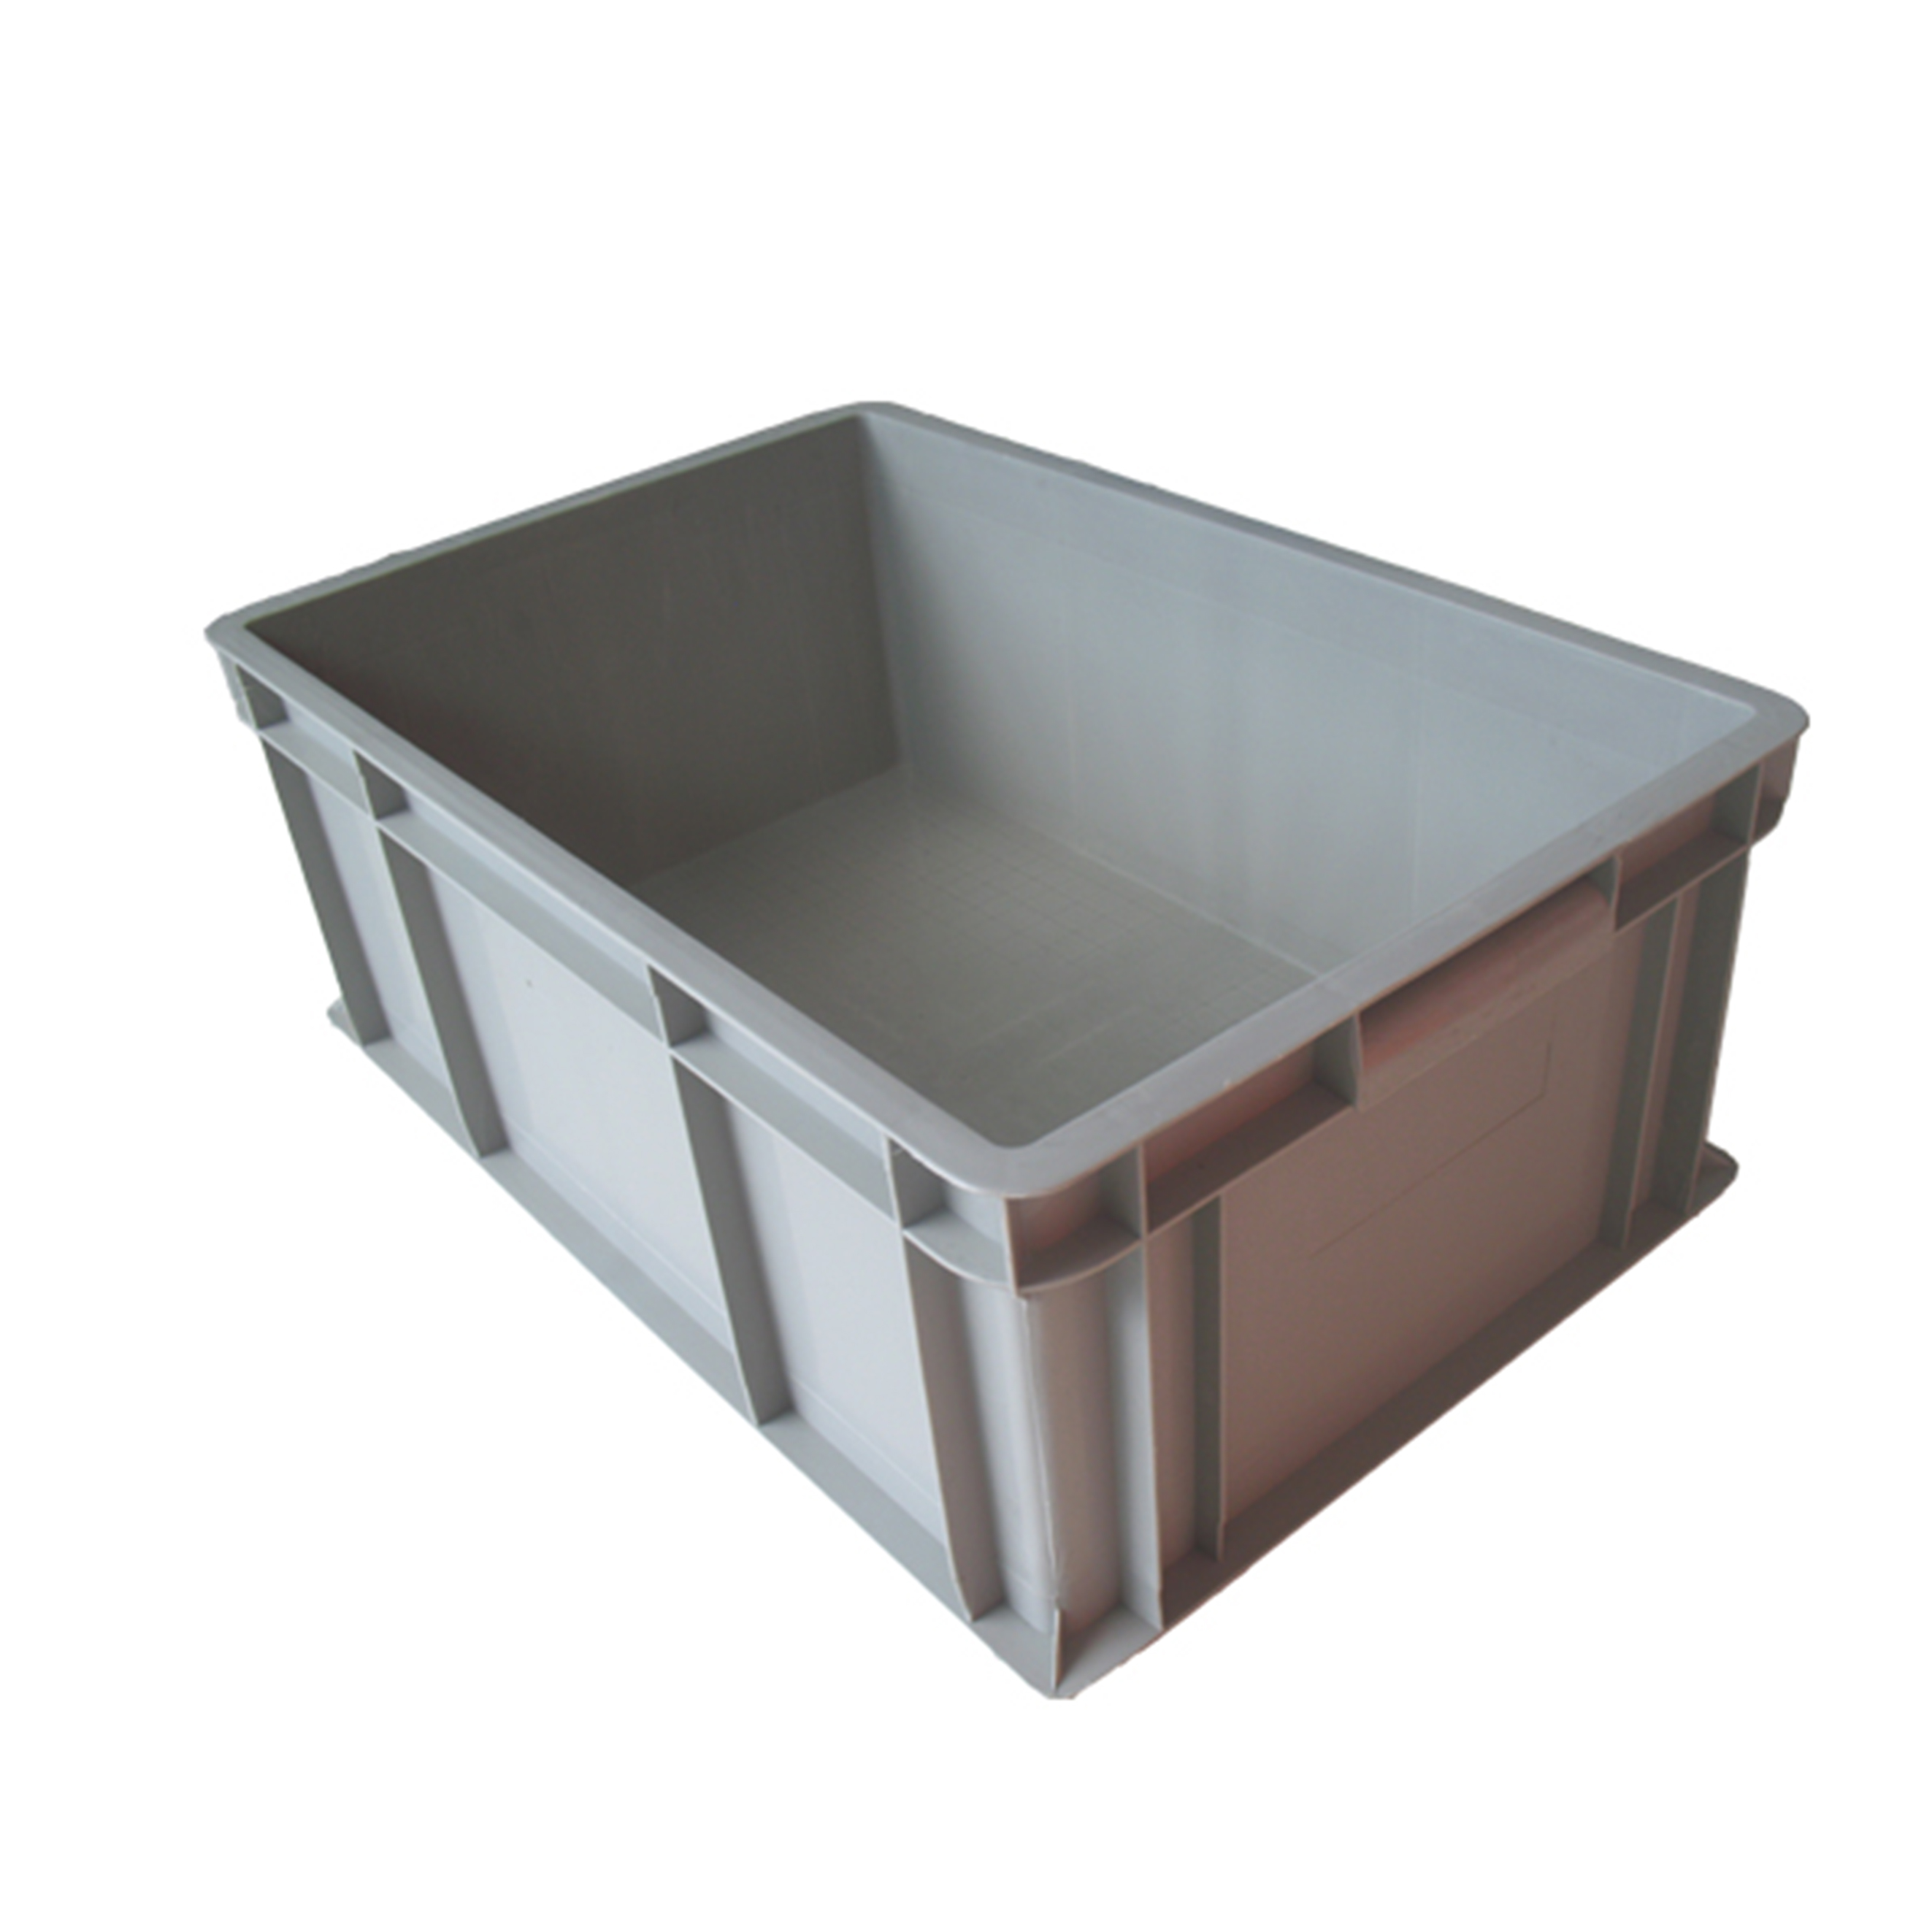 https://www.storage-totes.com/wp-content/uploads/2019/11/straight-wall-container-solid-stackable.jpg